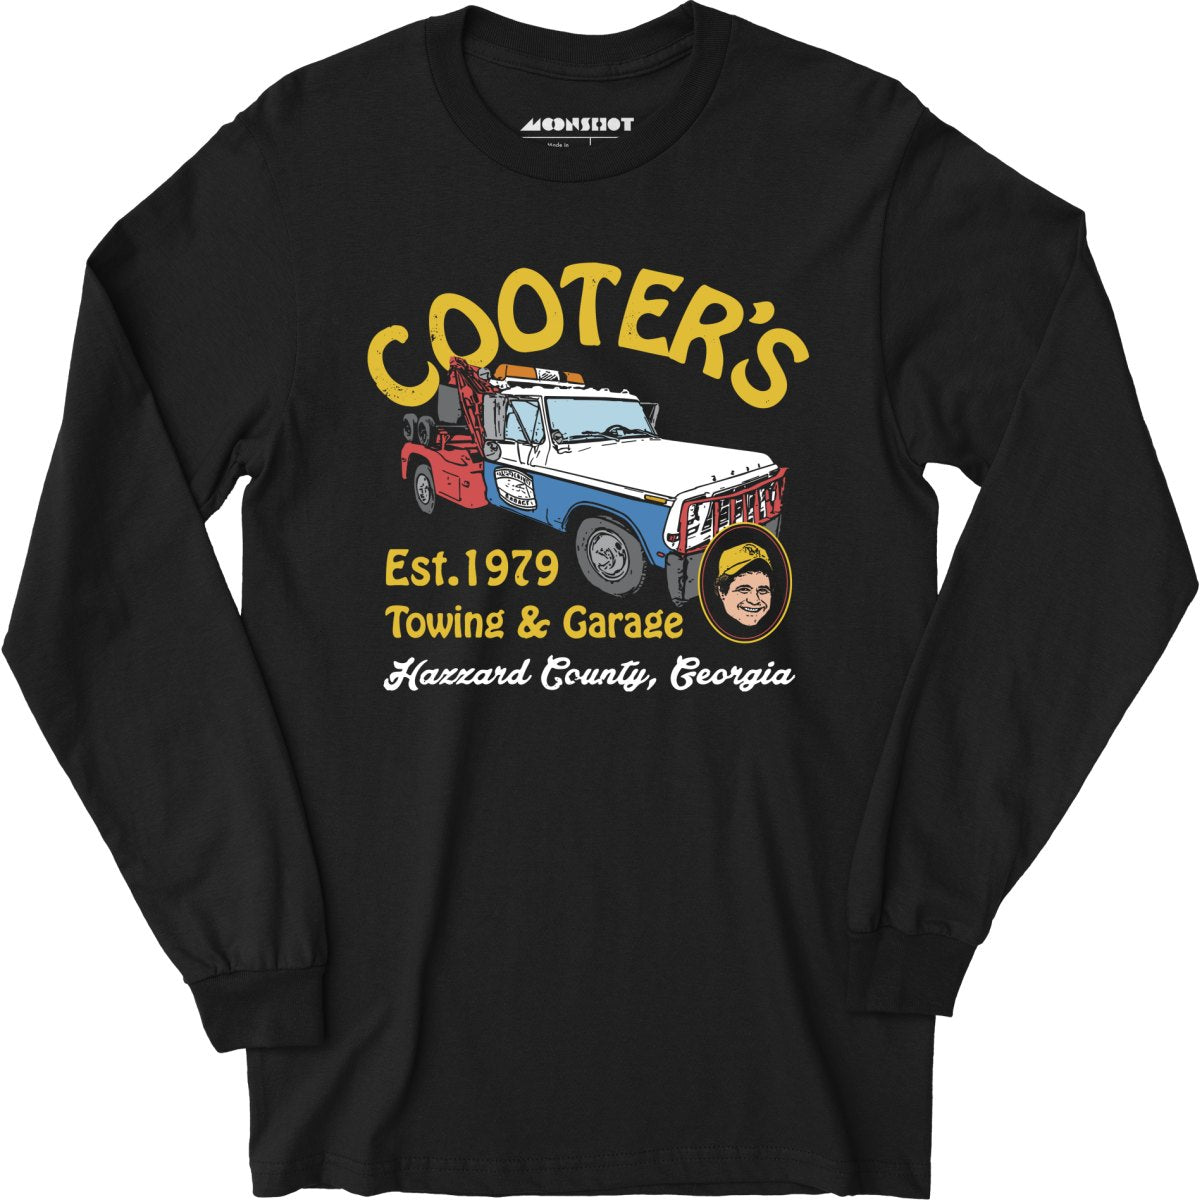 Cooter's Towing & Garage - Long Sleeve T-Shirt